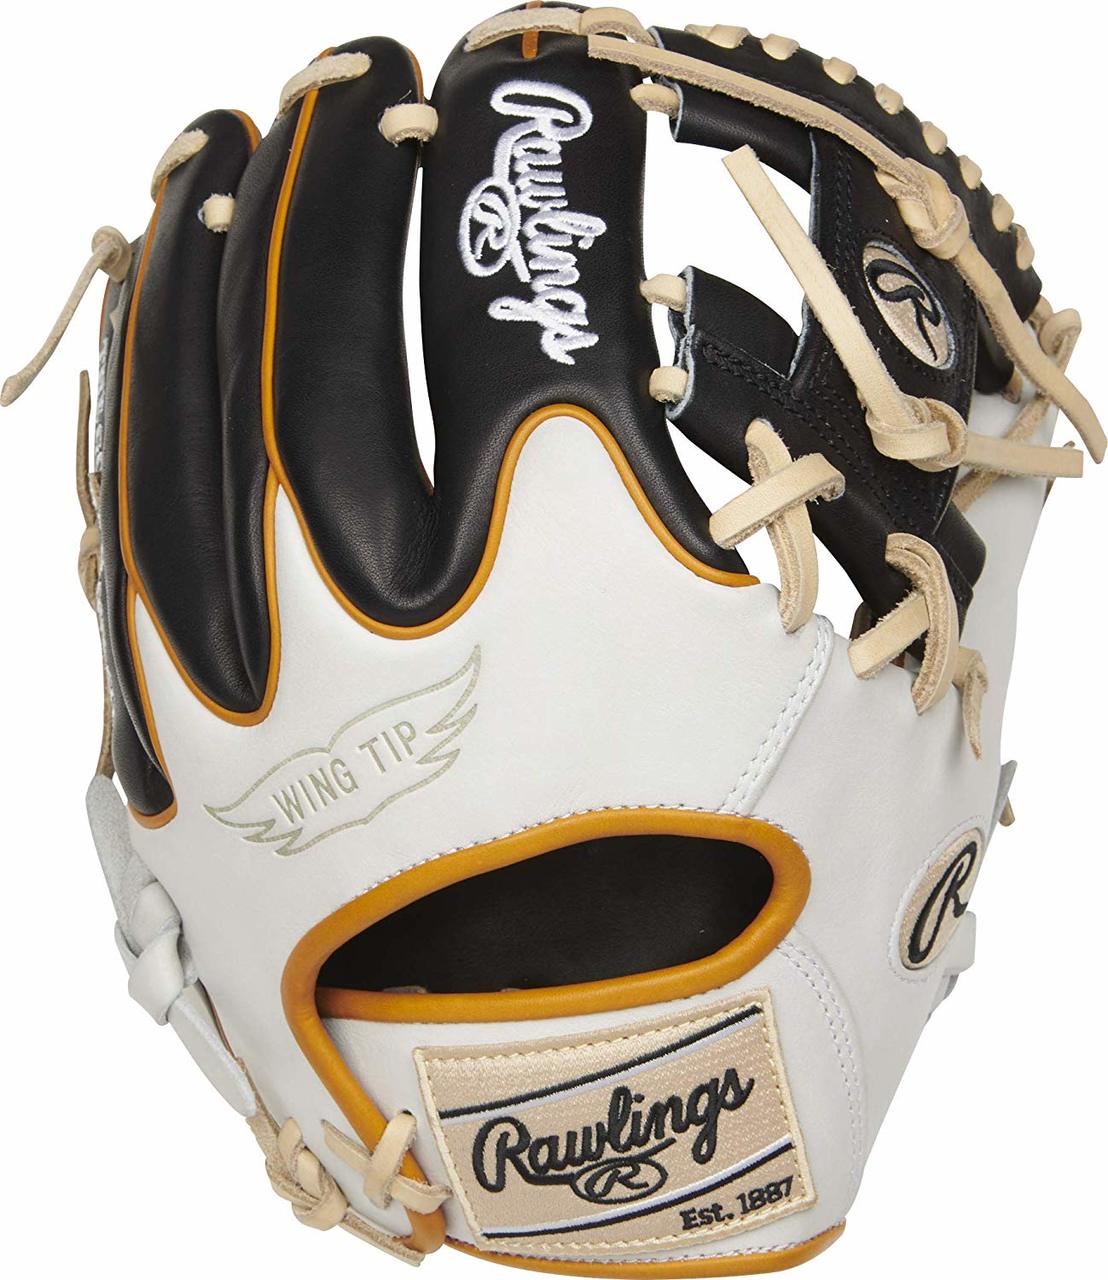 rawlings-heart-of-the-hide-r2g-baseball-glove-11-5-i-web-right-hand-throw PROR204W-2B-RightHandThrow Rawlings 083321598944 Designed for infielders the 11.5-inch Rawlings R2G glove forms the perfect